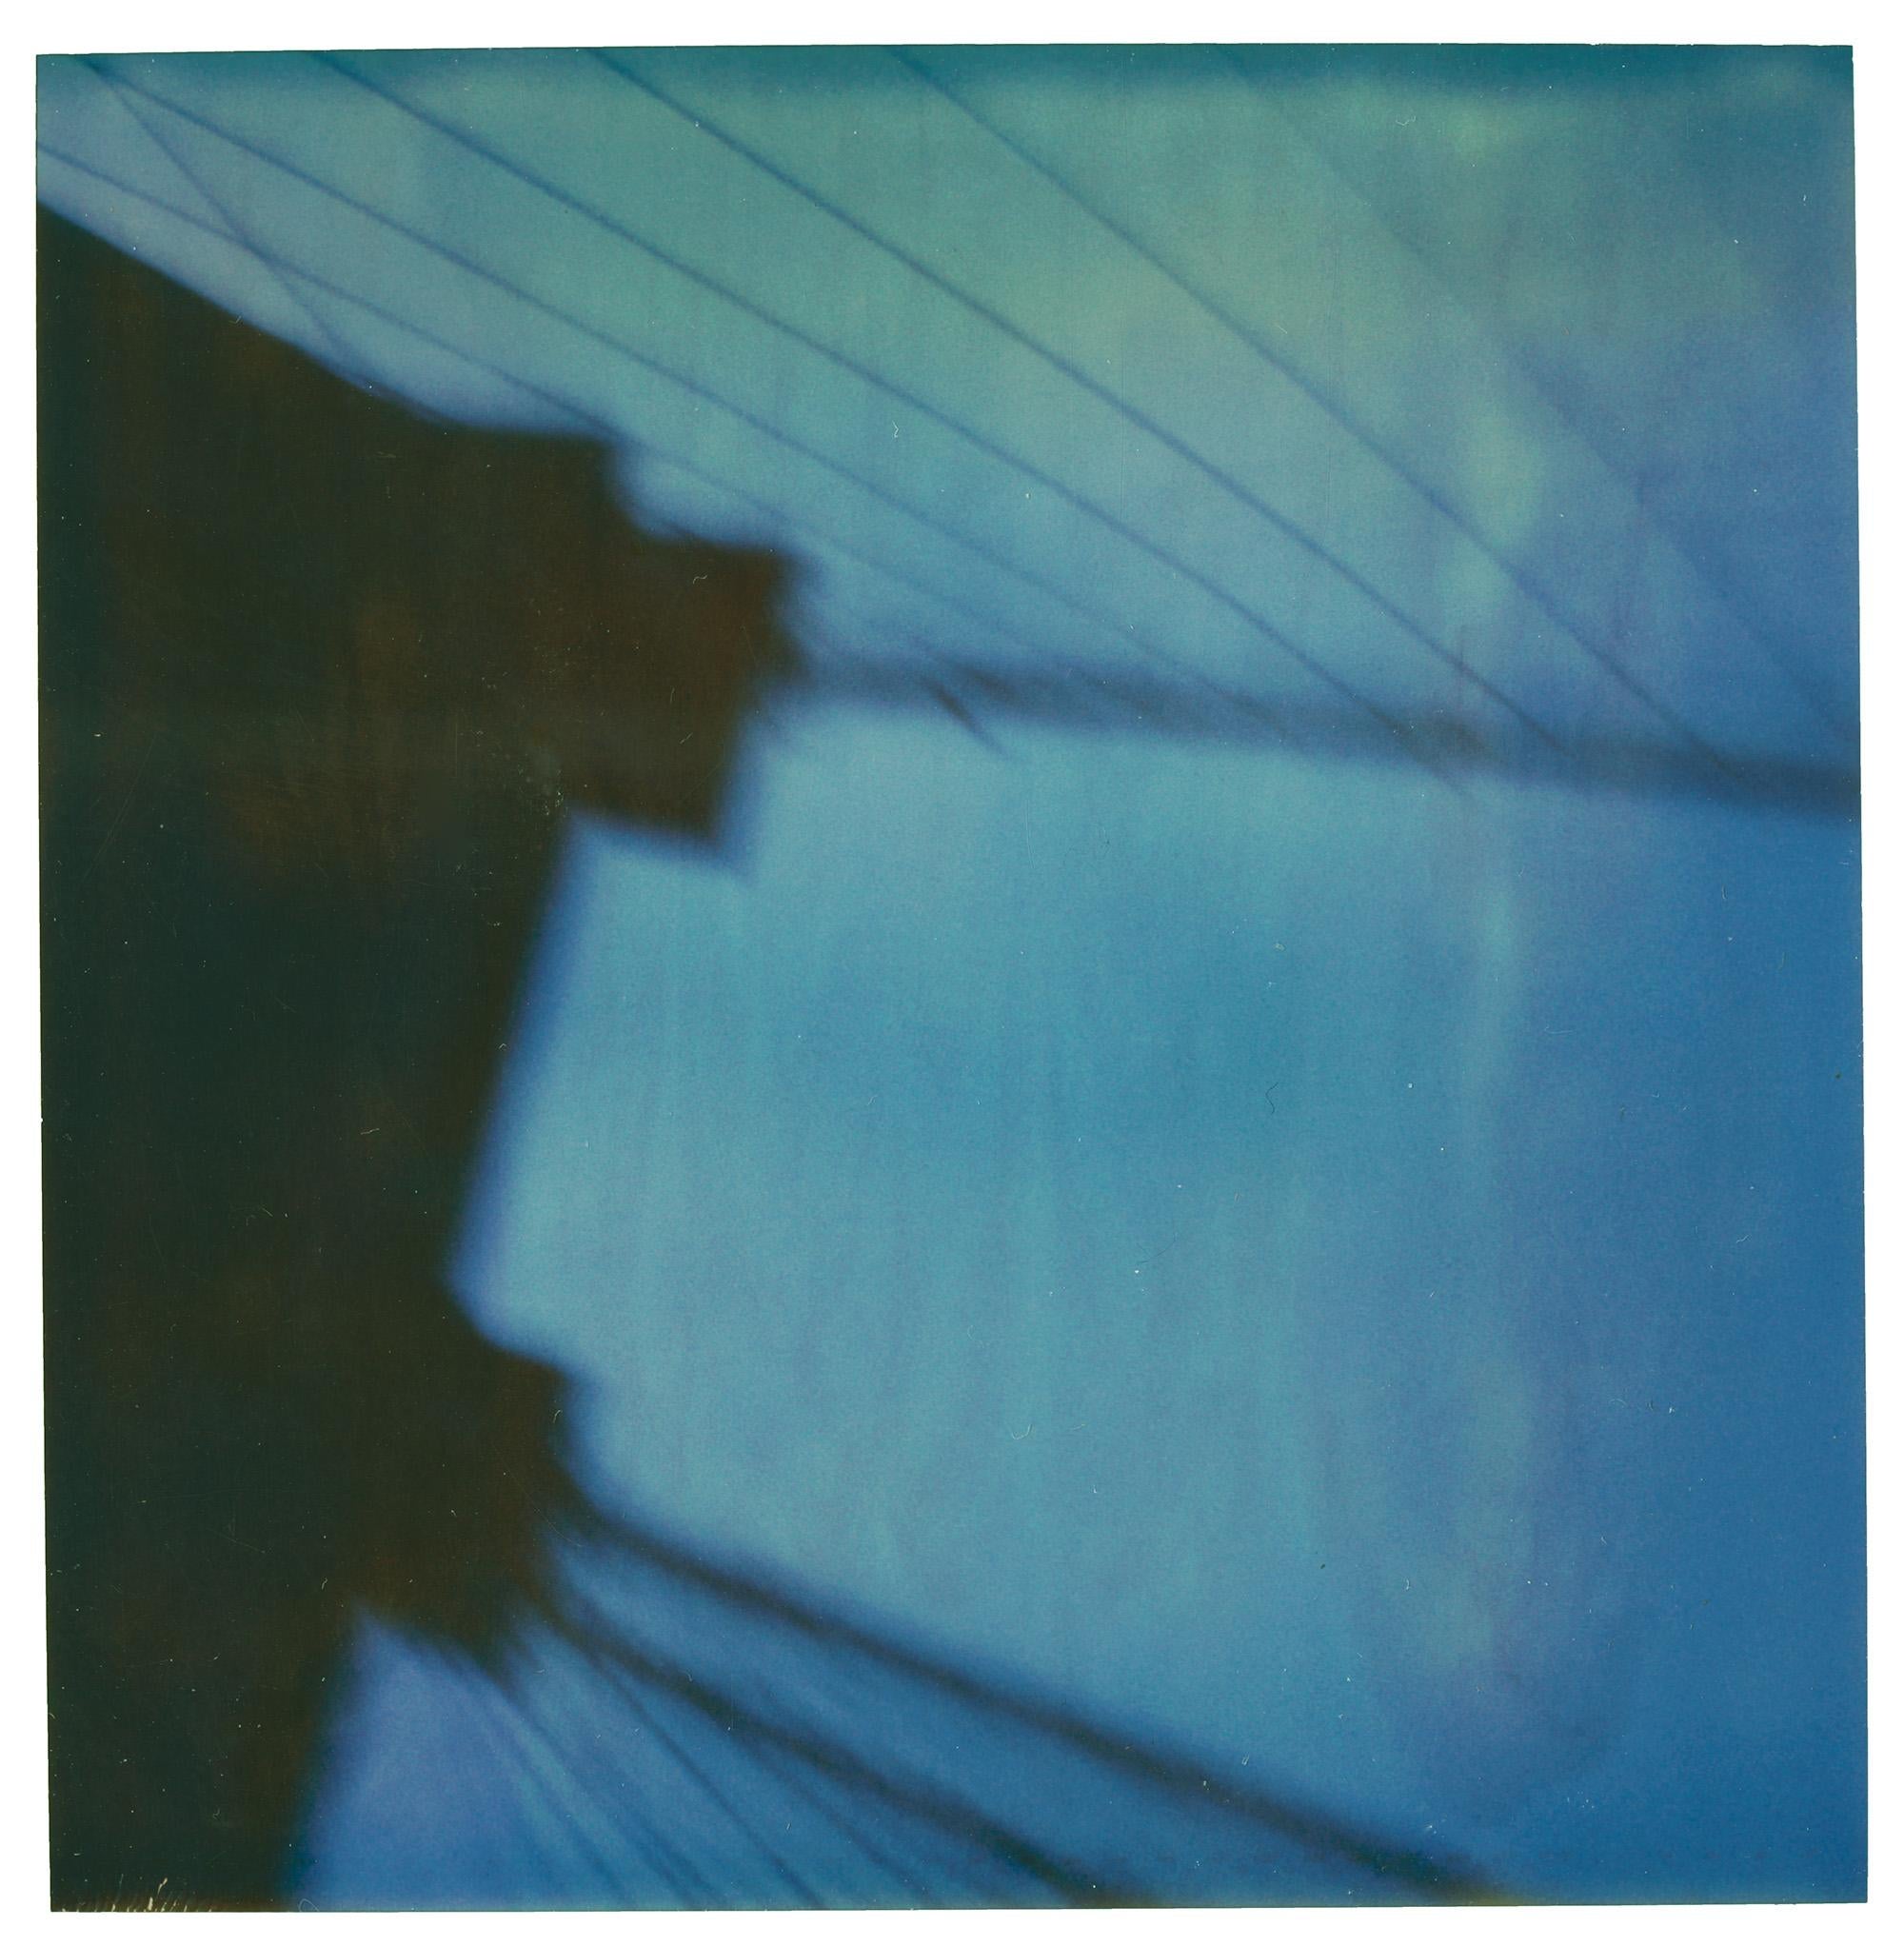 Brooklyn Bridge (Stay) - 21st Century, Polaroid, Color, New York, Contemporary - Gray Abstract Photograph by Stefanie Schneider